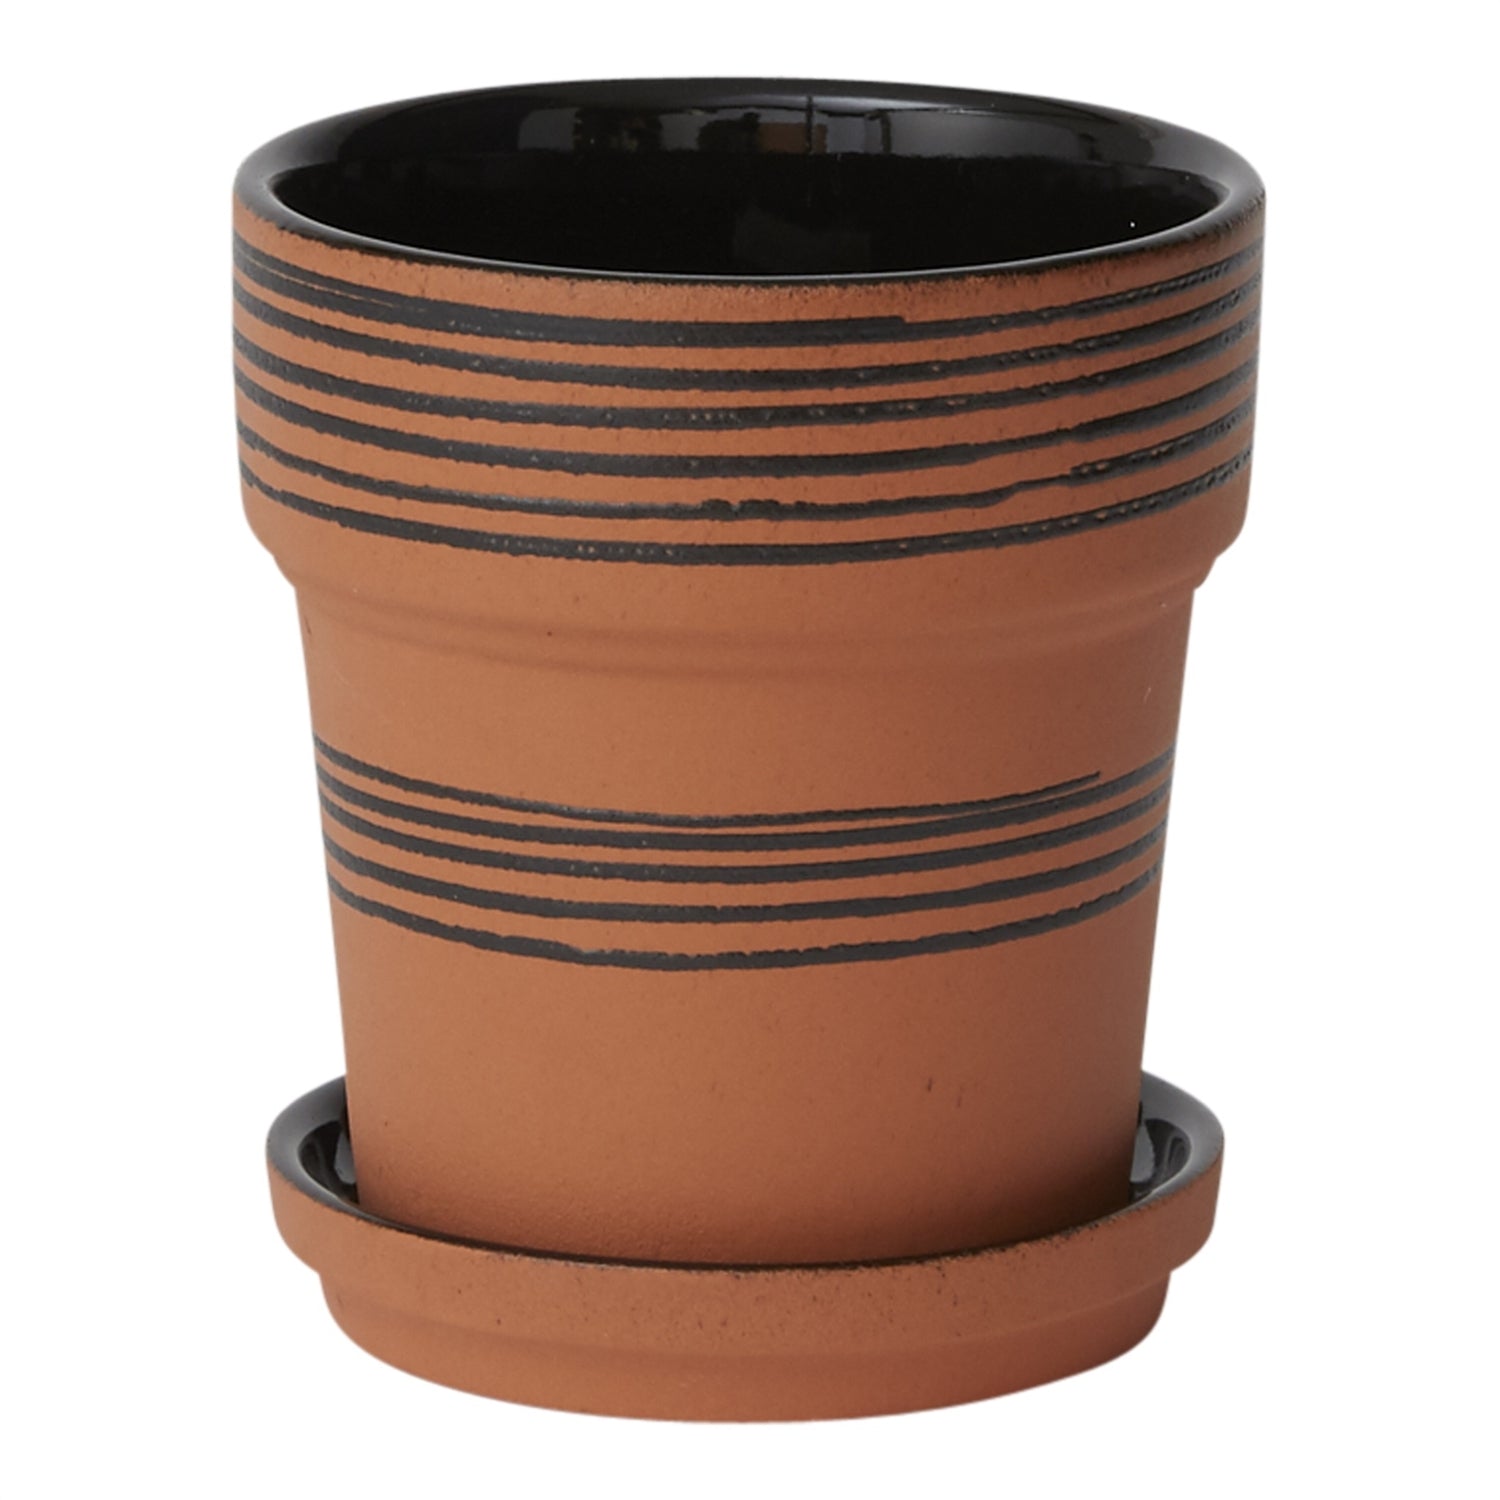 Our Herati Pot is the perfect addition to any garden or window ledge. Ceremic Terra-cotta with black horizontal banding design. Comes with watering tray in same material. Small pot 4" x 4.5" (opening size 3.5") Large pot 6.5" x 6.5" (opening size 6")